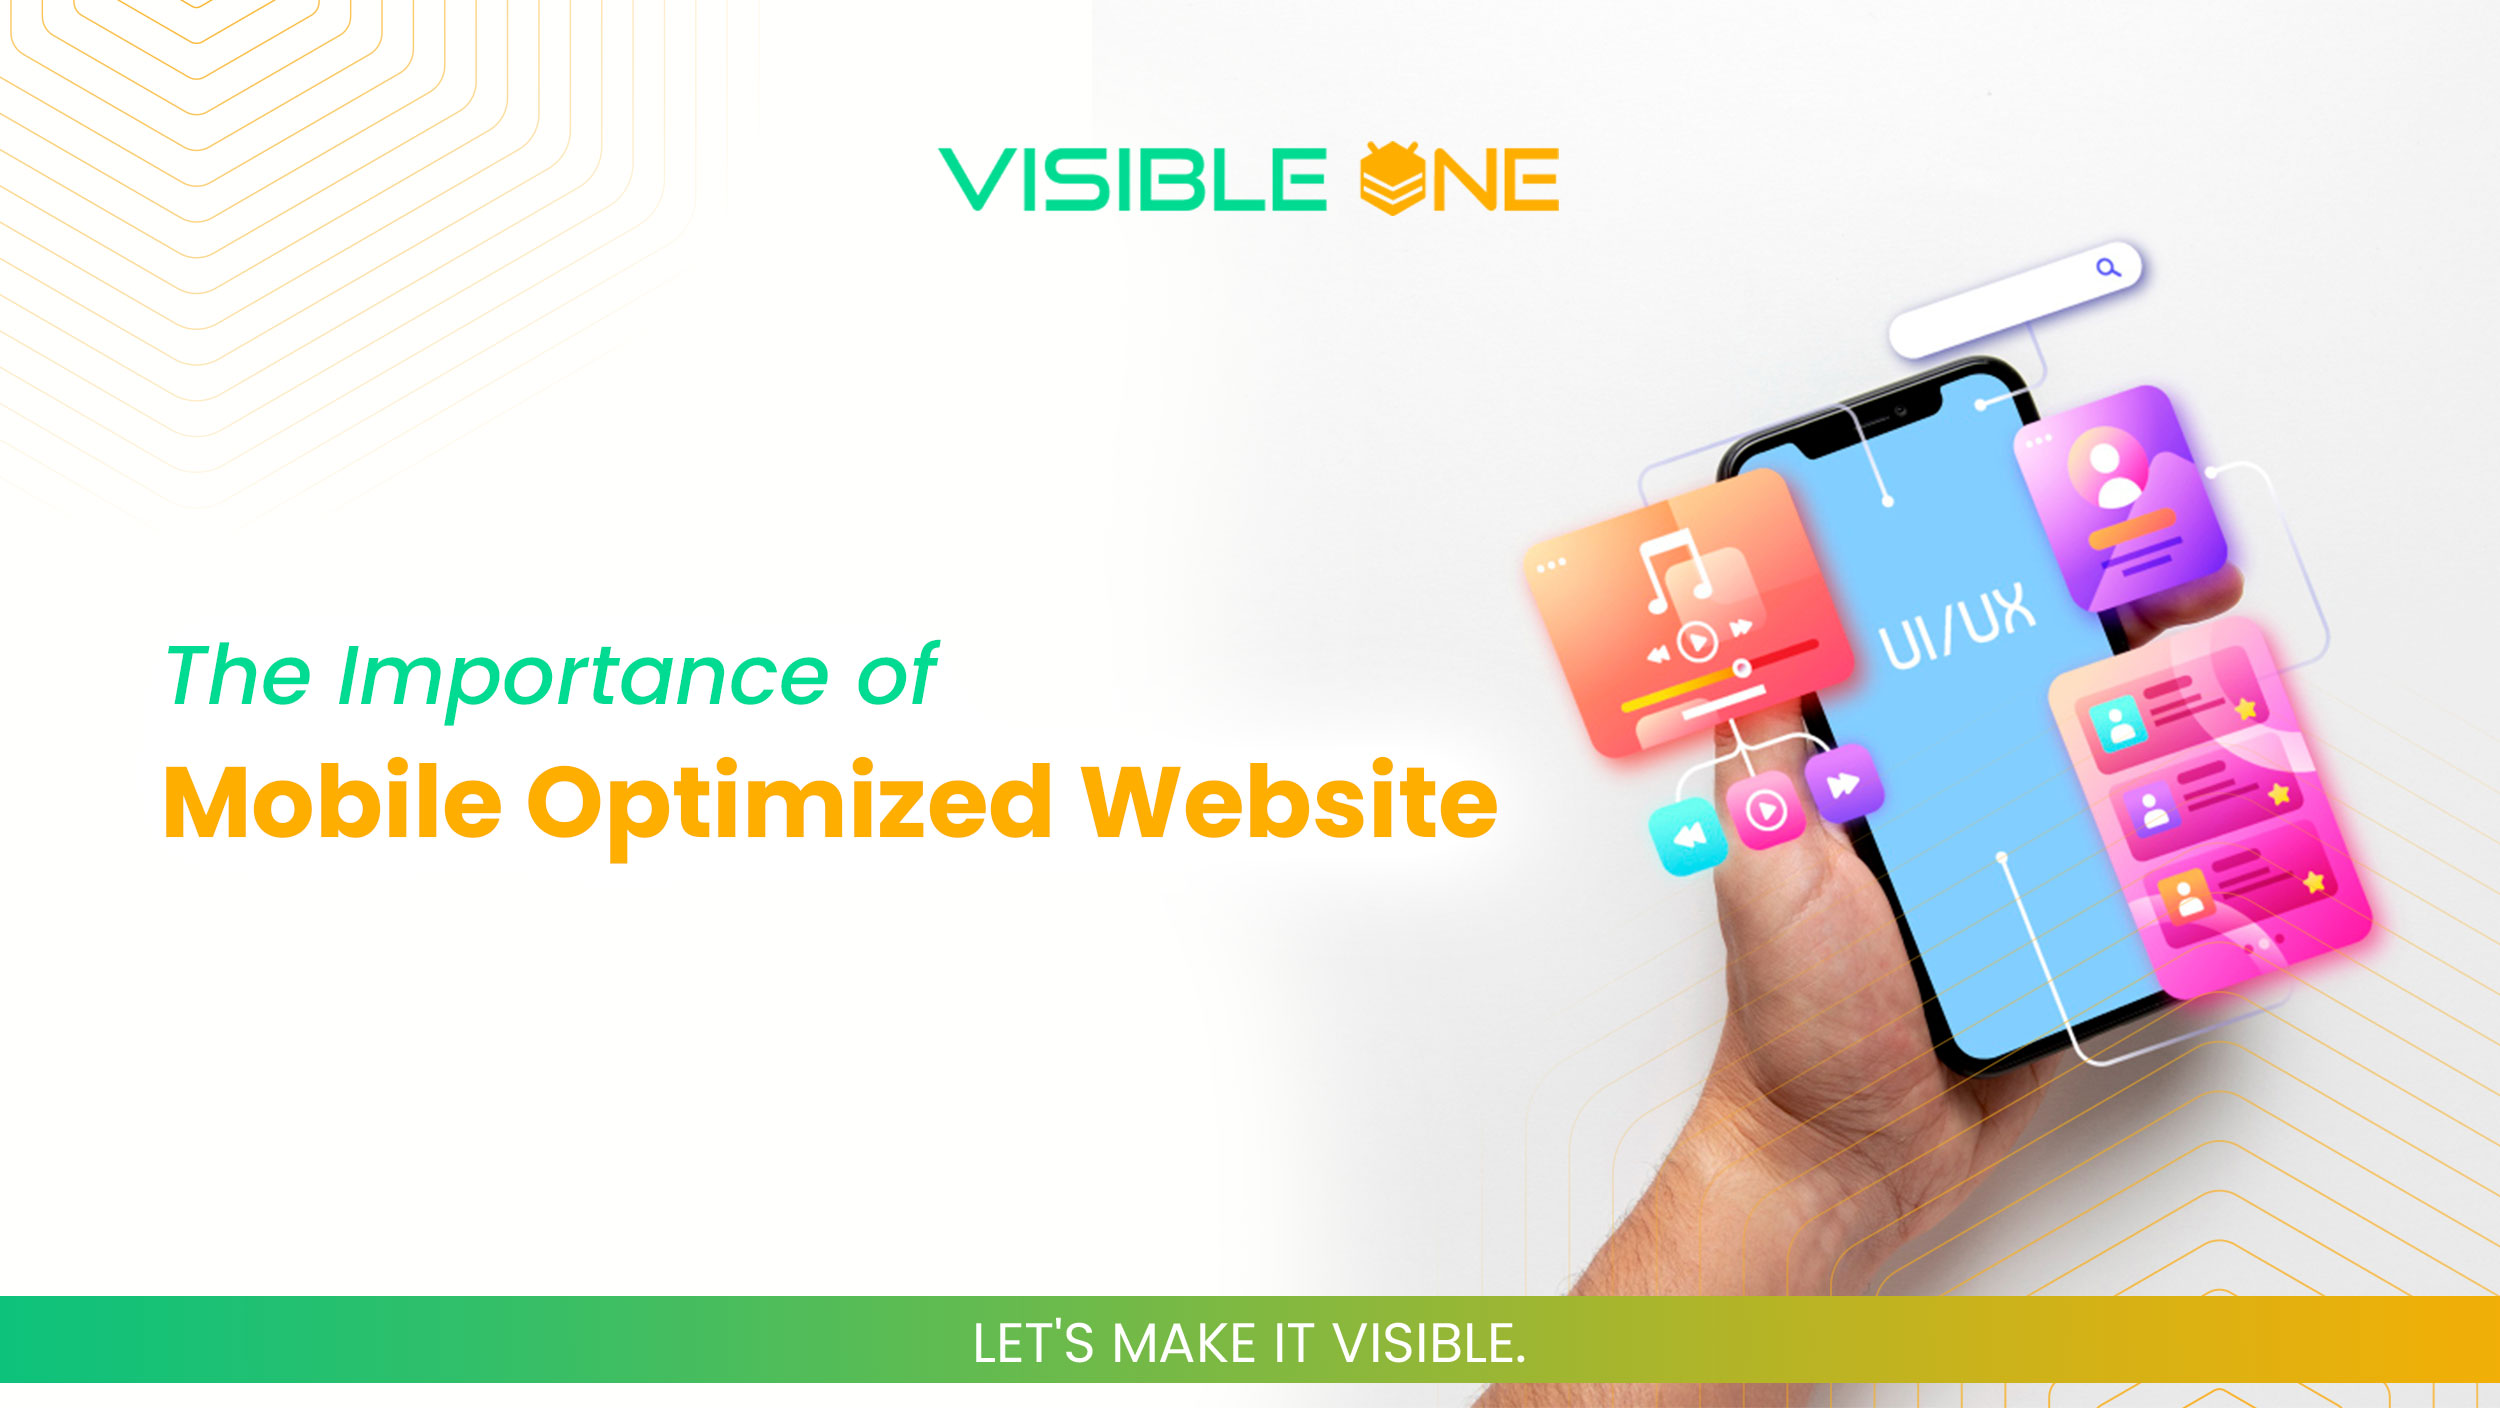 The Importance of Mobile Optimized Website